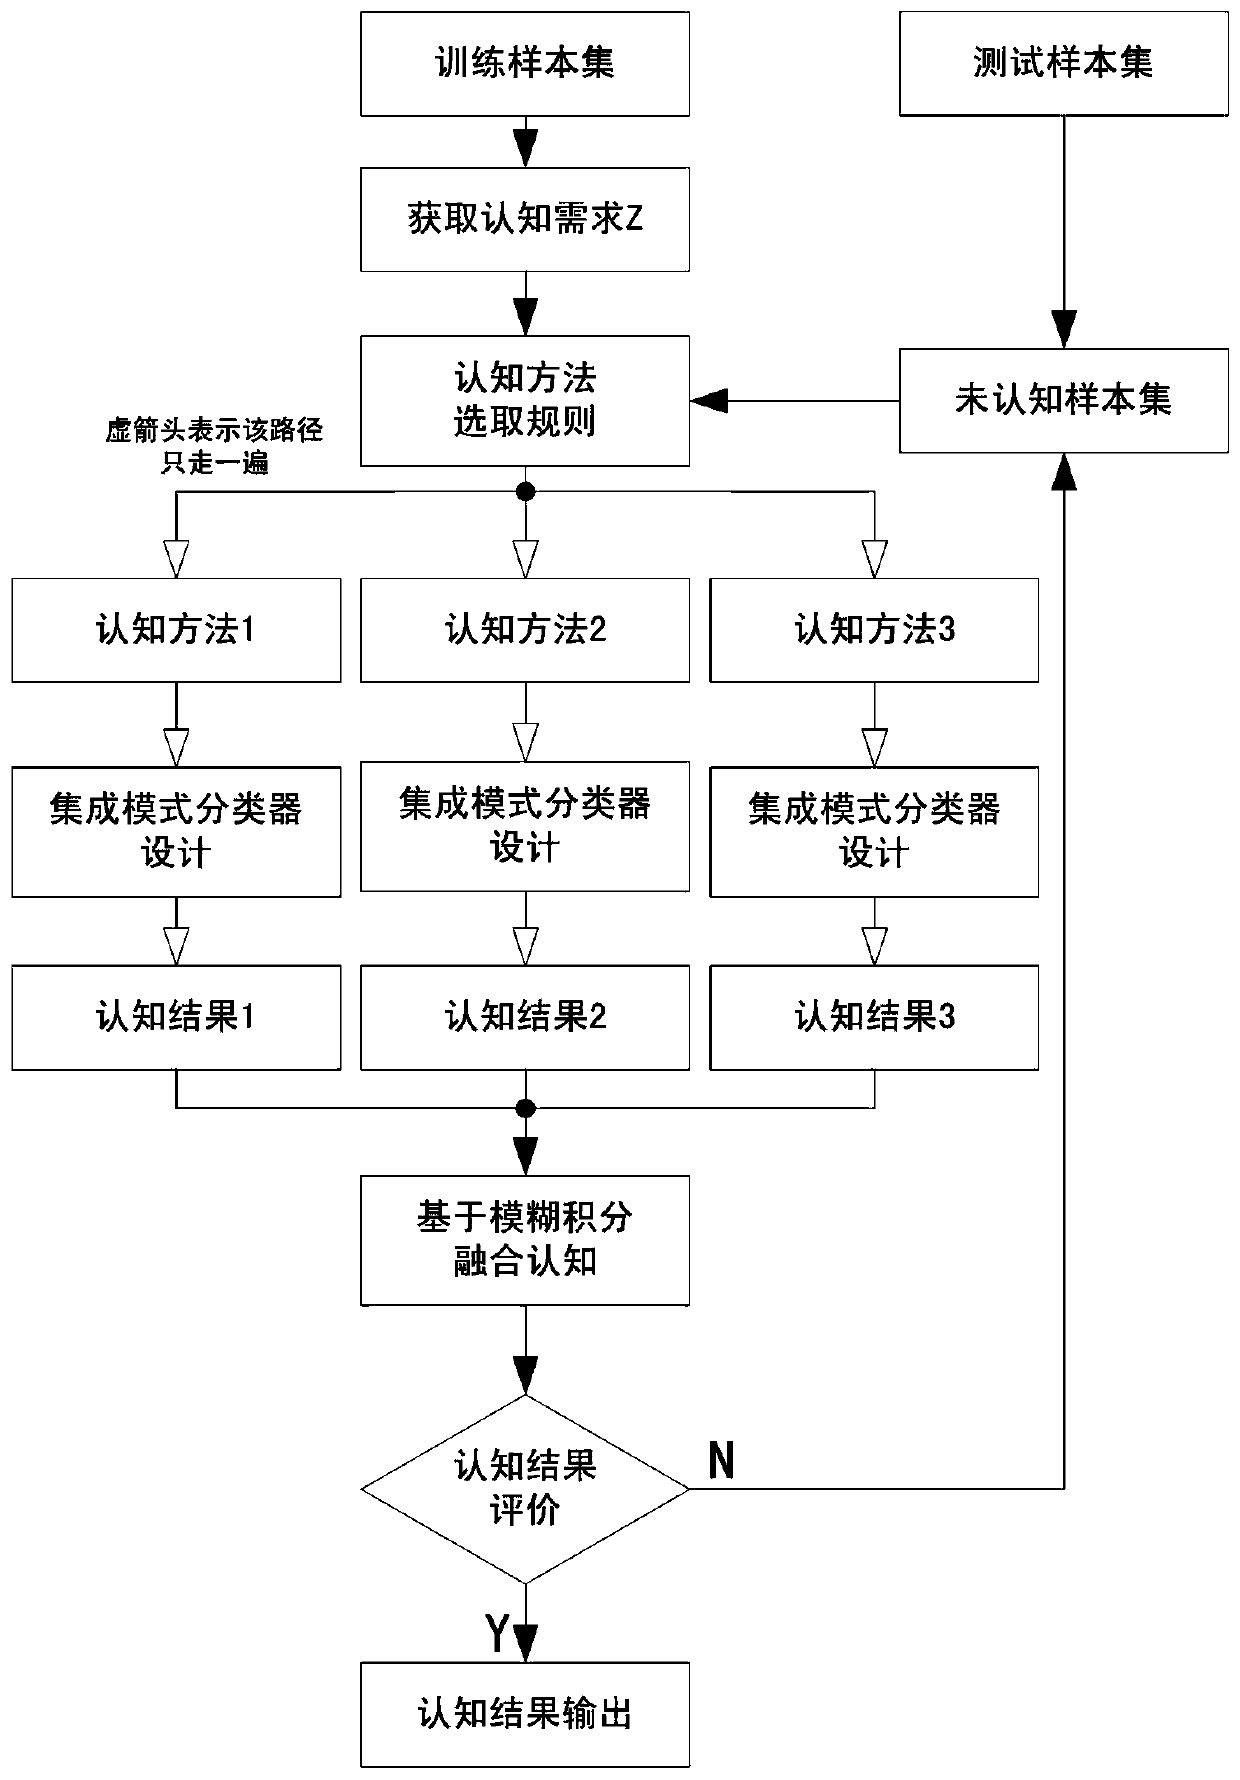 An Off-line Handwritten Chinese Character Recognition Method with Feedback-like Adjustment Mechanism